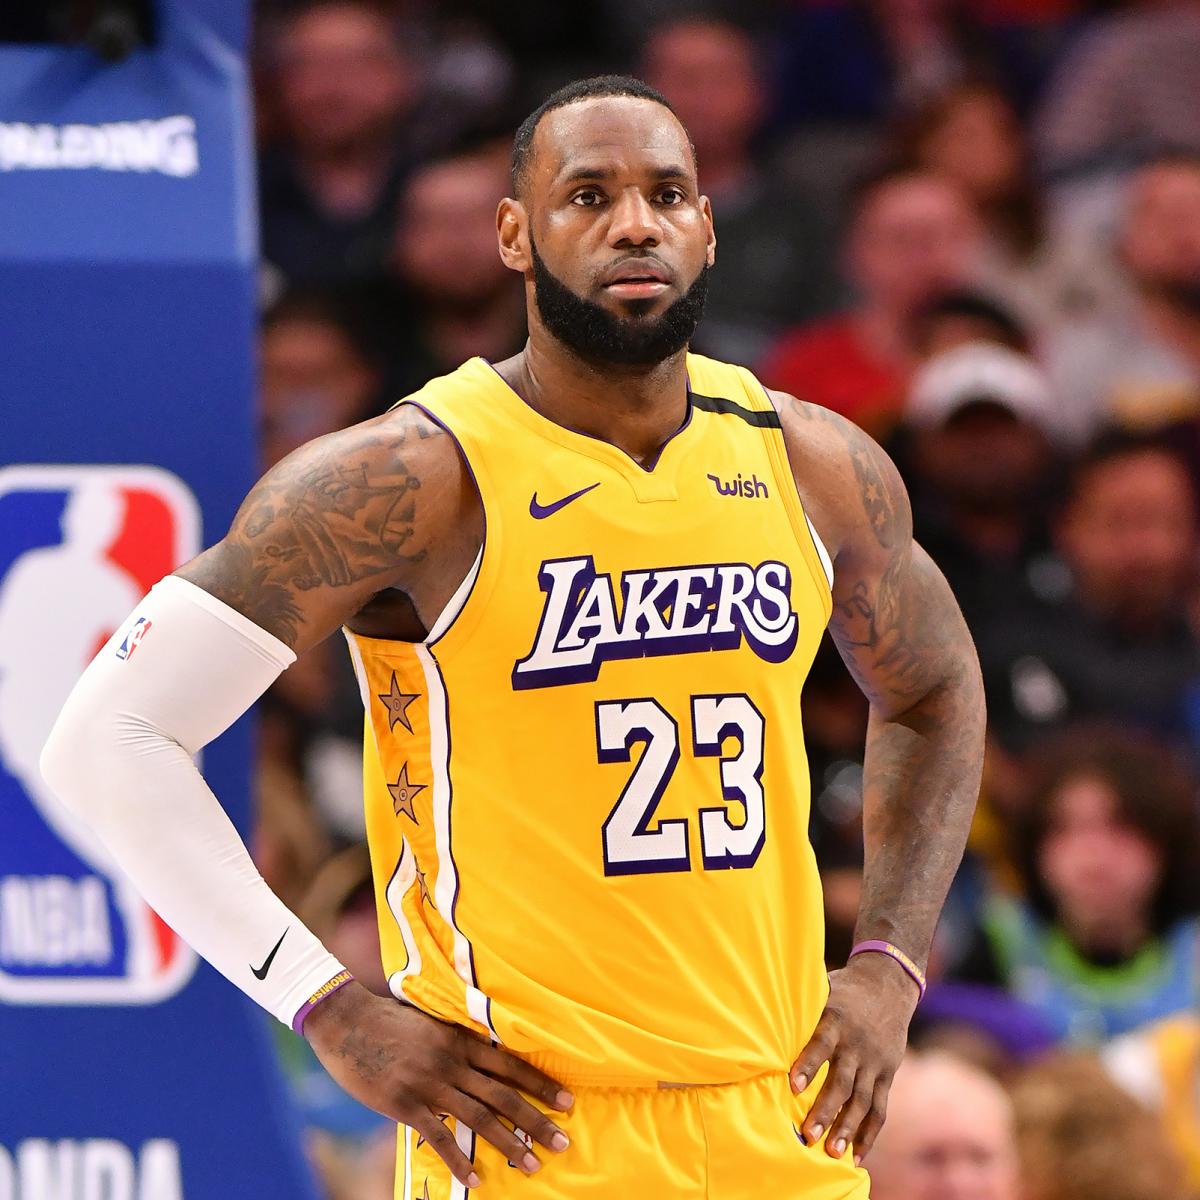 LeBron James reboots #WashedKing after perceived slight from NBA